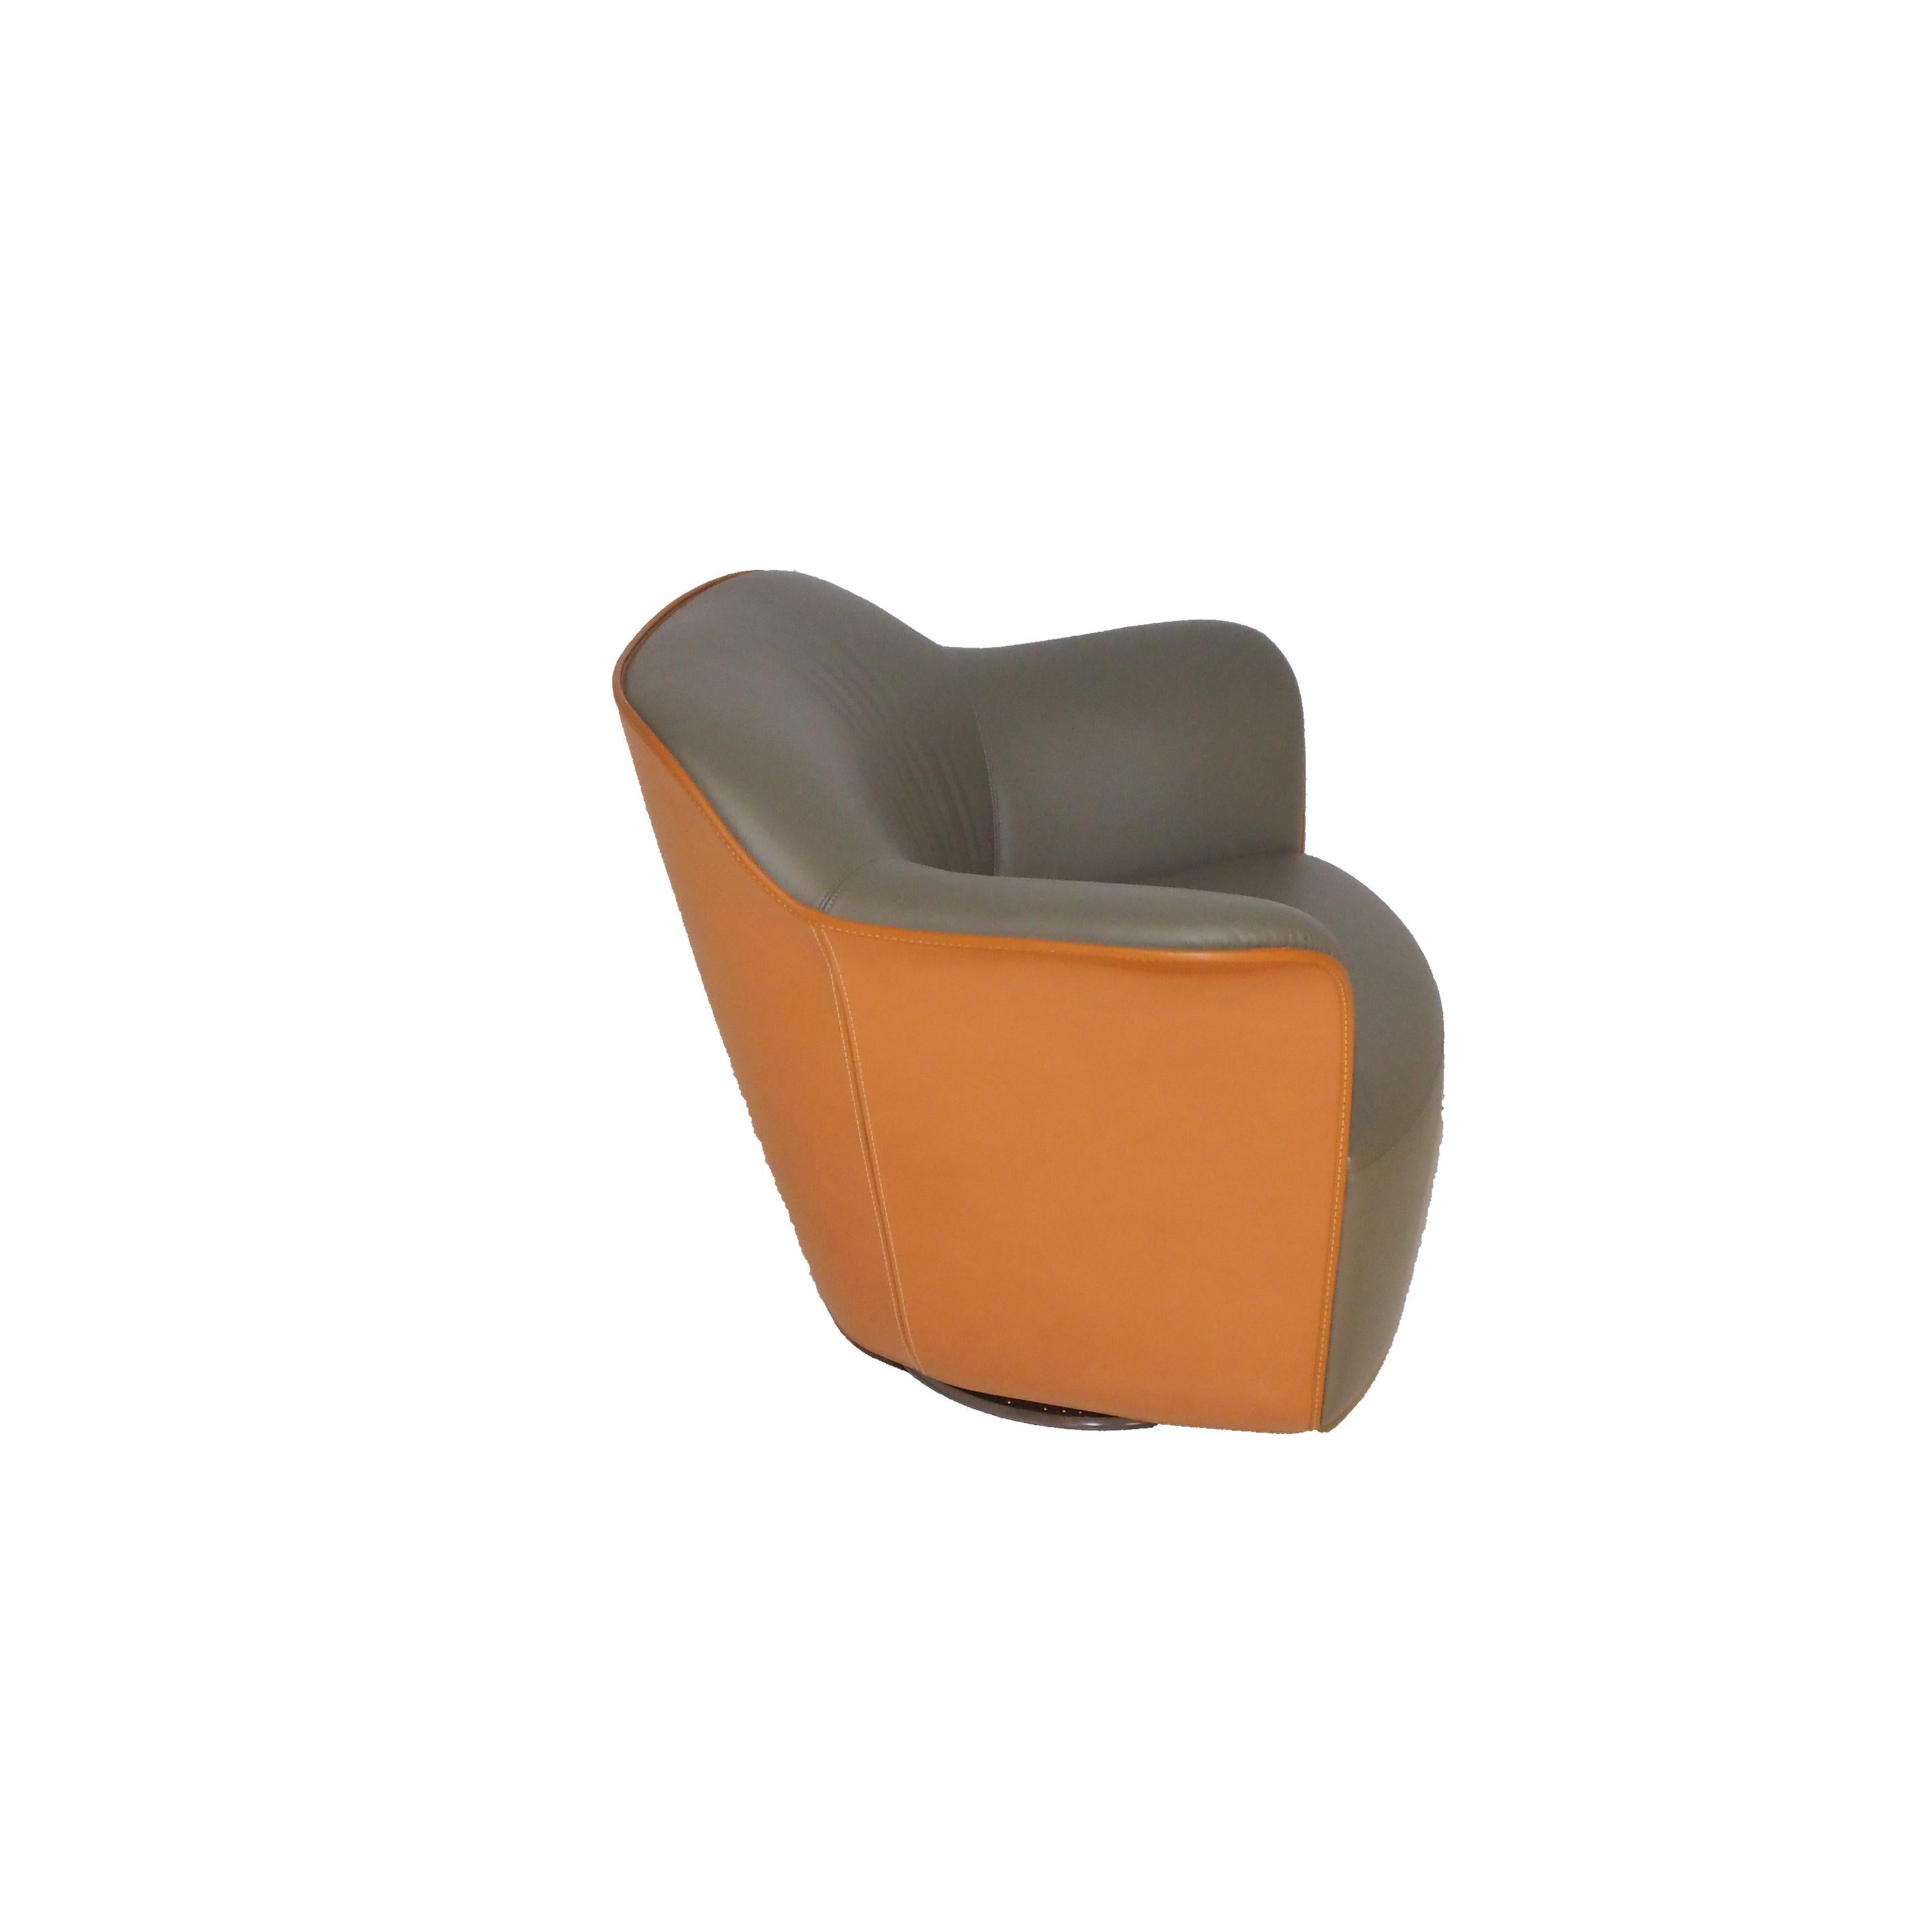 Aida, armchair has a soft and graceful design that brings to mind the corolla of a flower. In fact, its armrests open and curve outwards like petals. When designing Aida, Roberto Lazzeroni combined classic construction techniques with contemporary